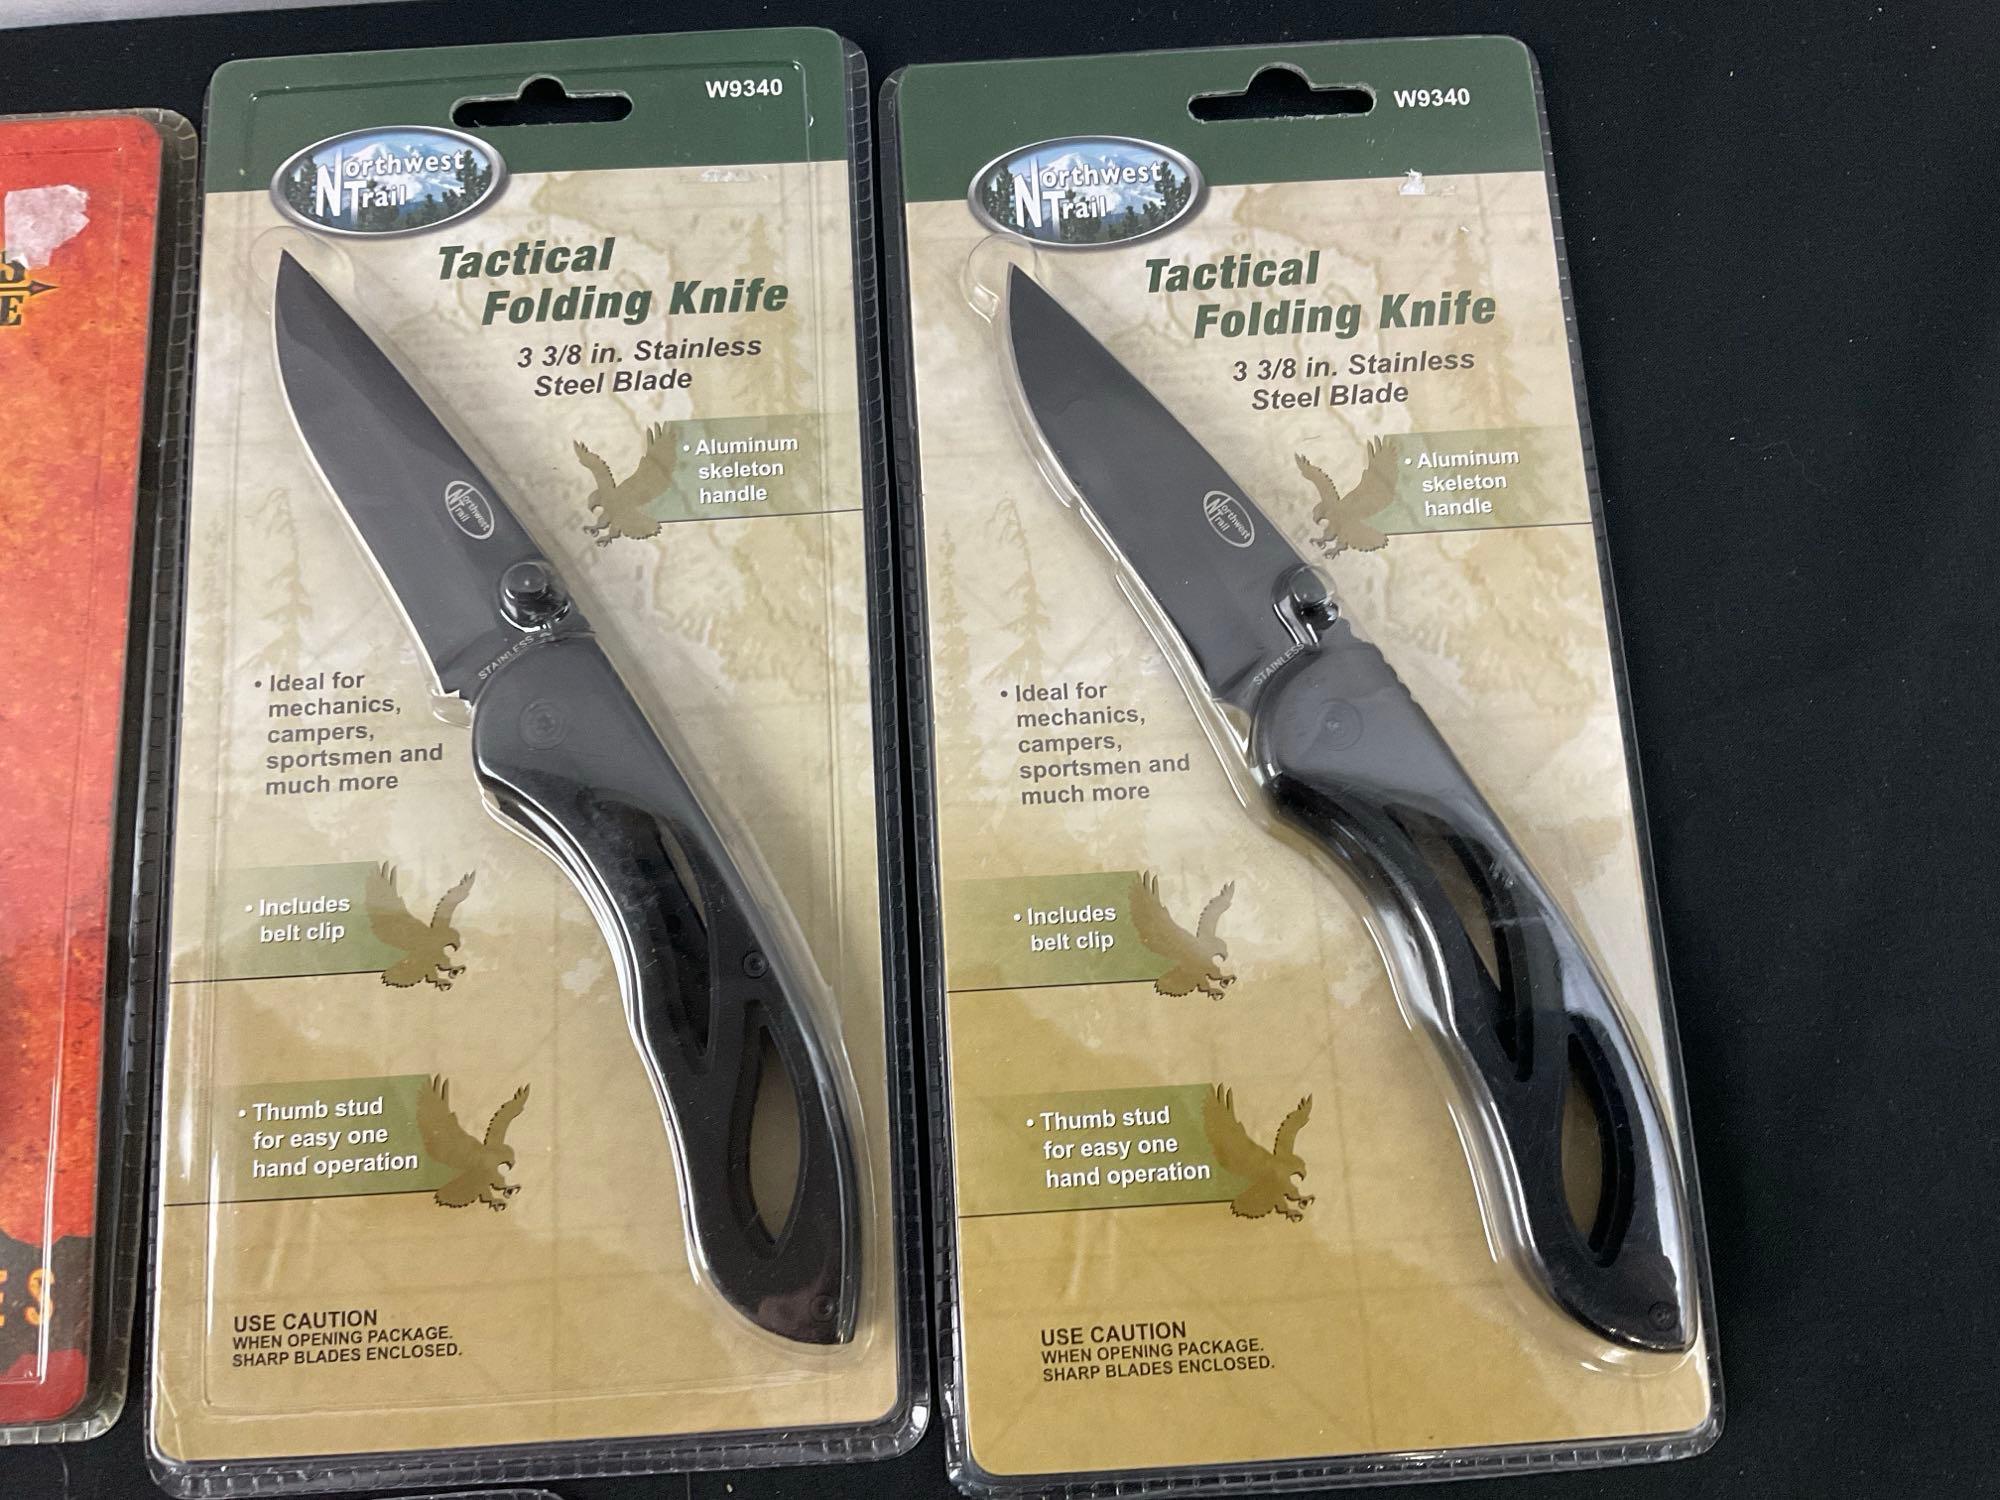 10 Assorted Knives in original packaging by Hunters Advantage & Northwest Trail